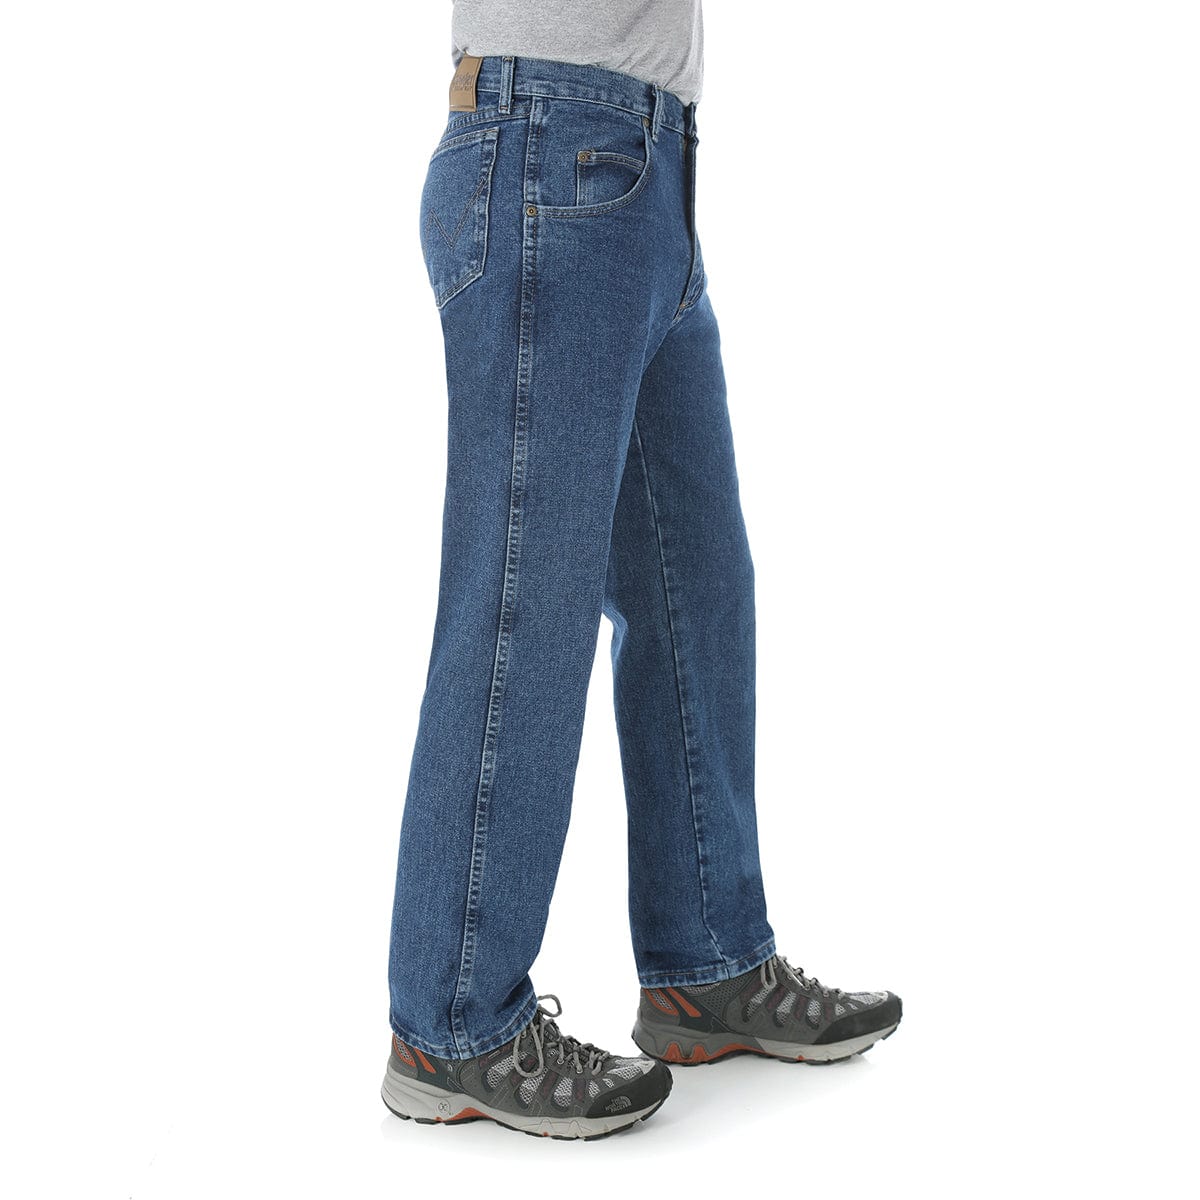 Wrangler Rugged Wear Relaxed Fit Jeans, Antique Indigo